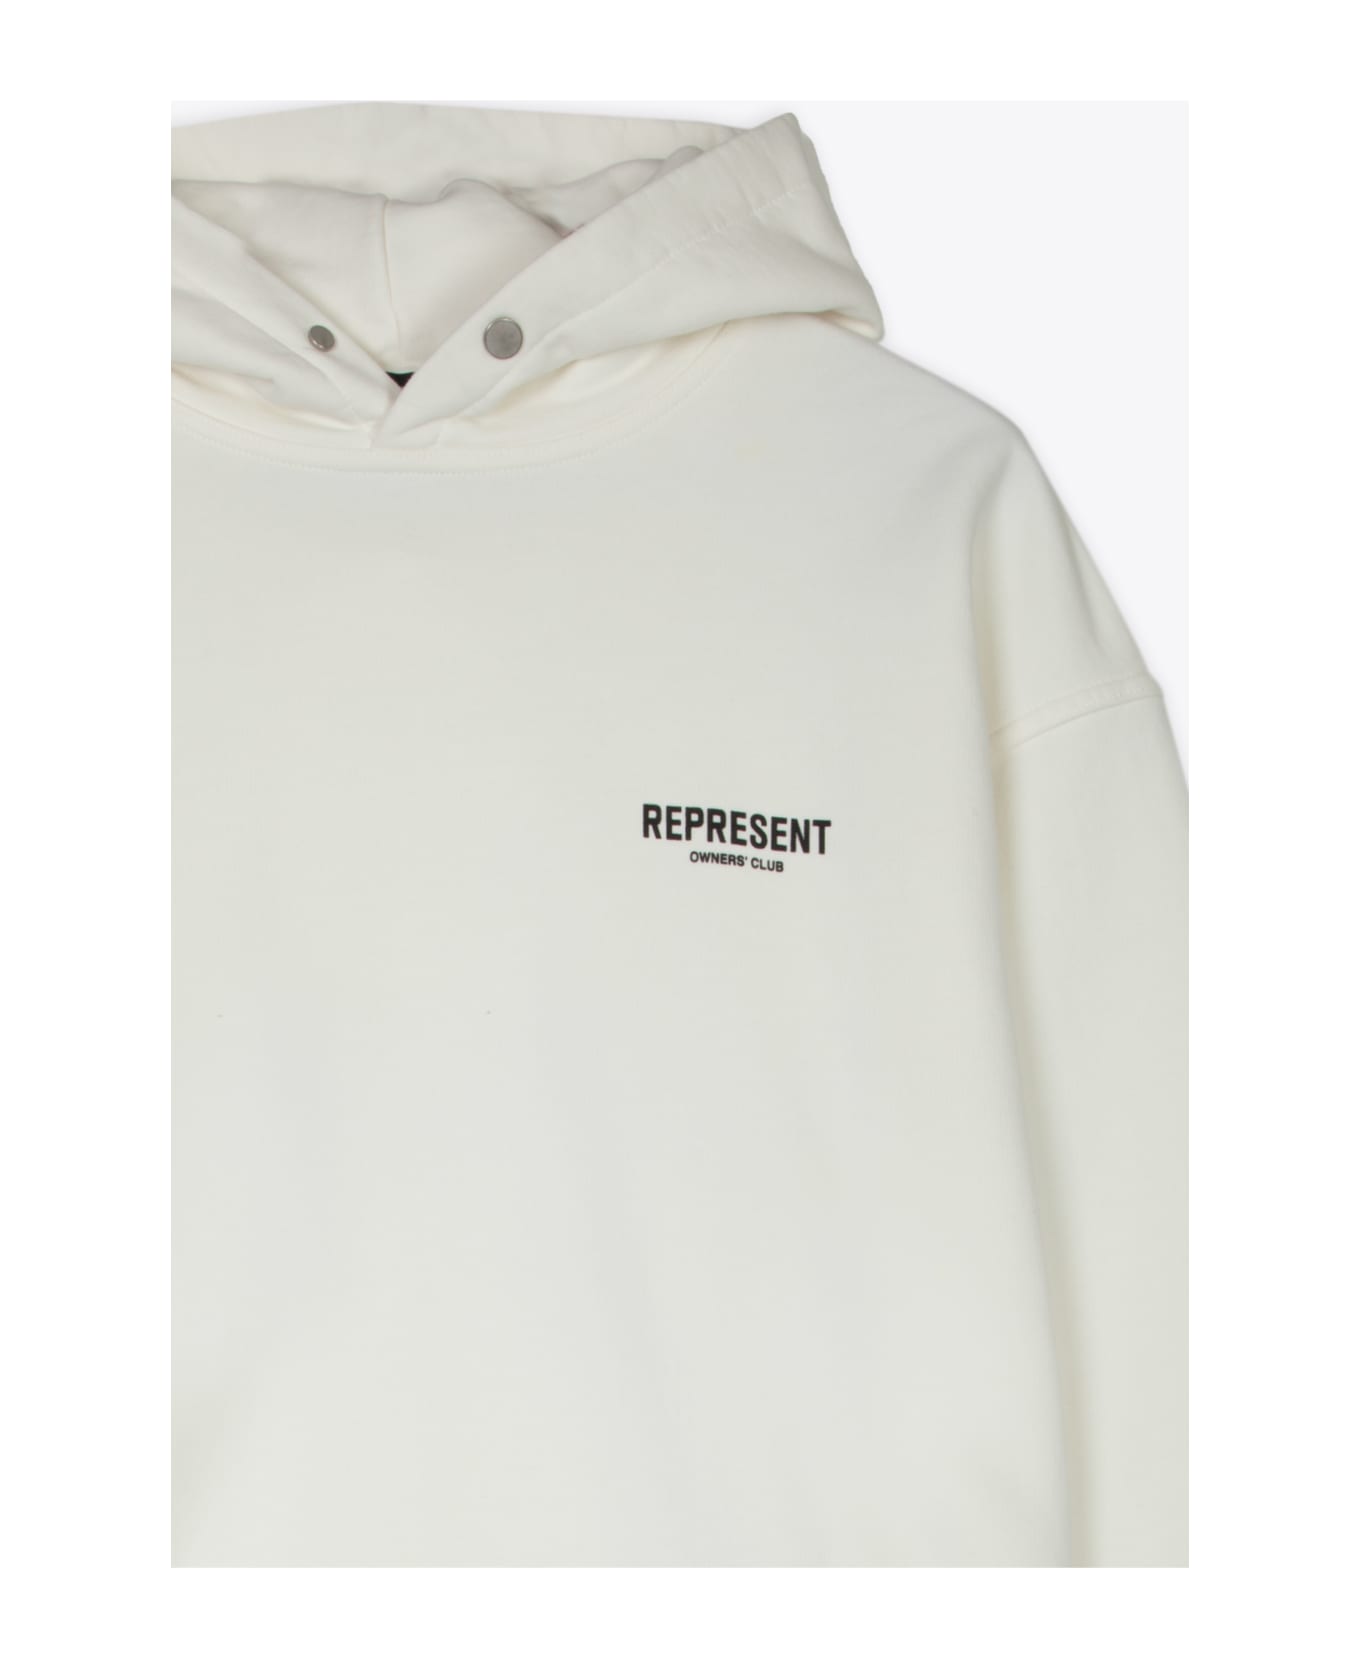 REPRESENT Owners Club Hoodie White cotton hoodie with logo - Owners Club Hoodie - Bianco